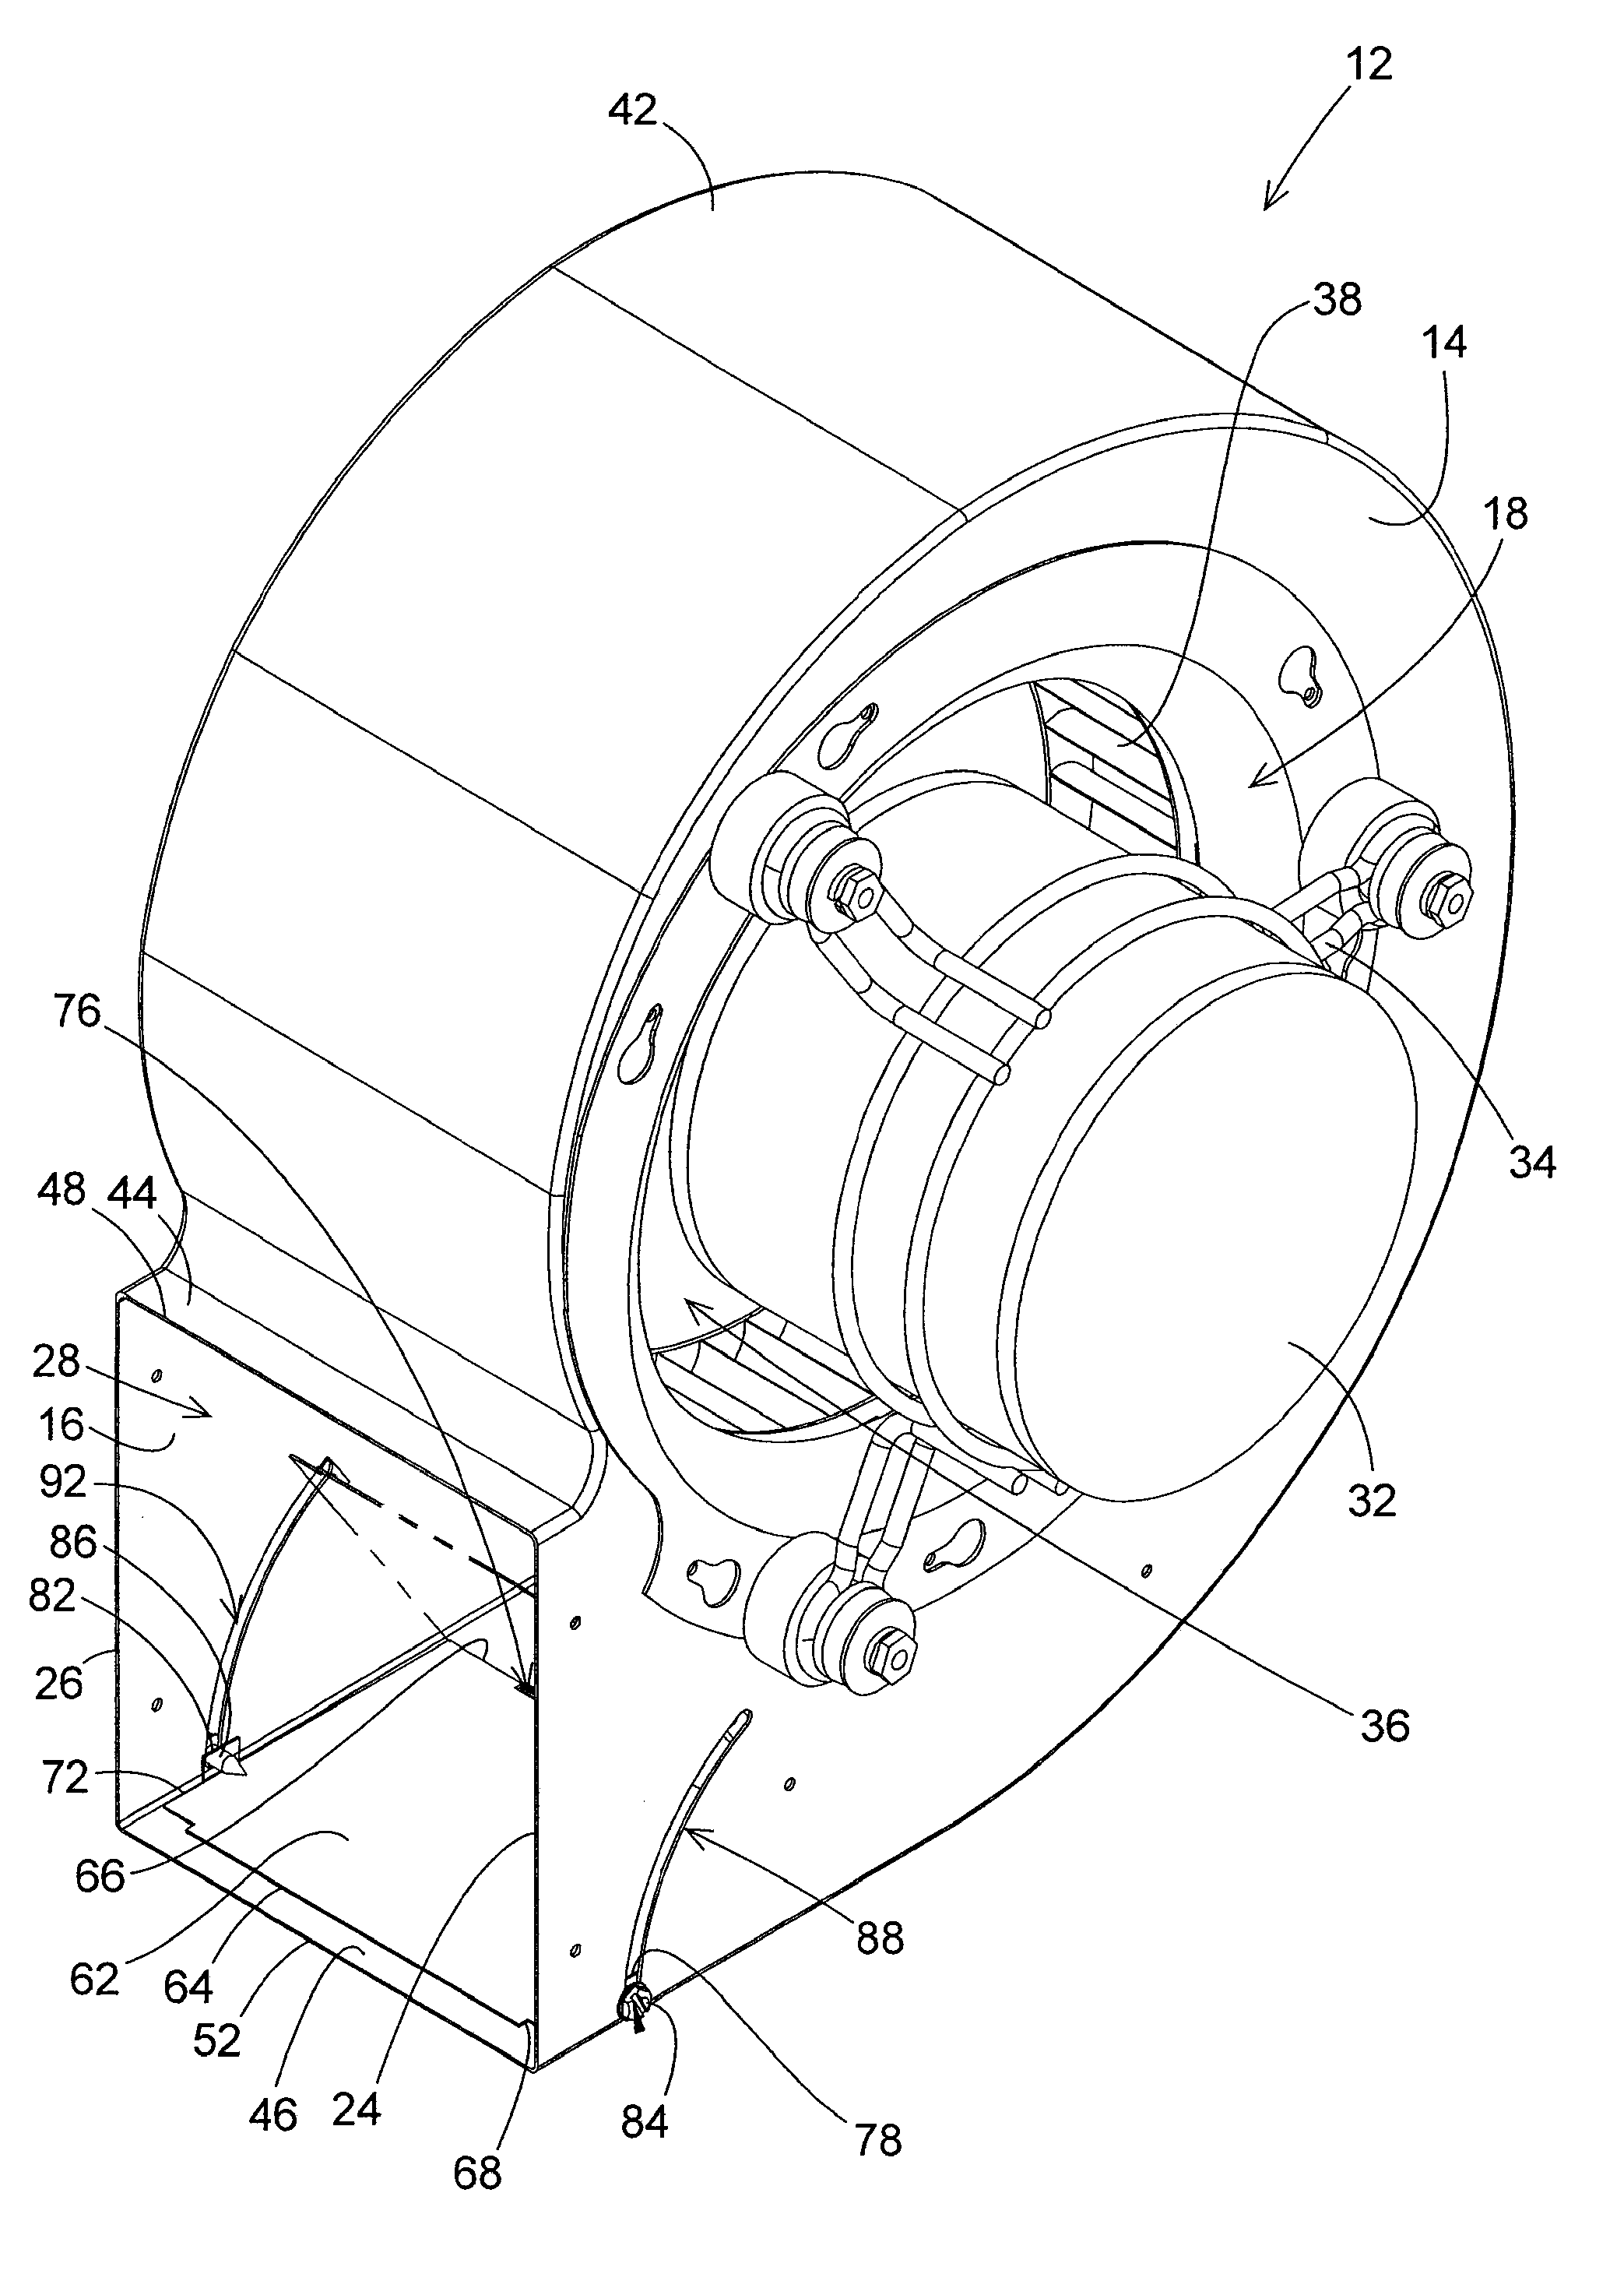 Air distribution blower housing with adjustable restriction